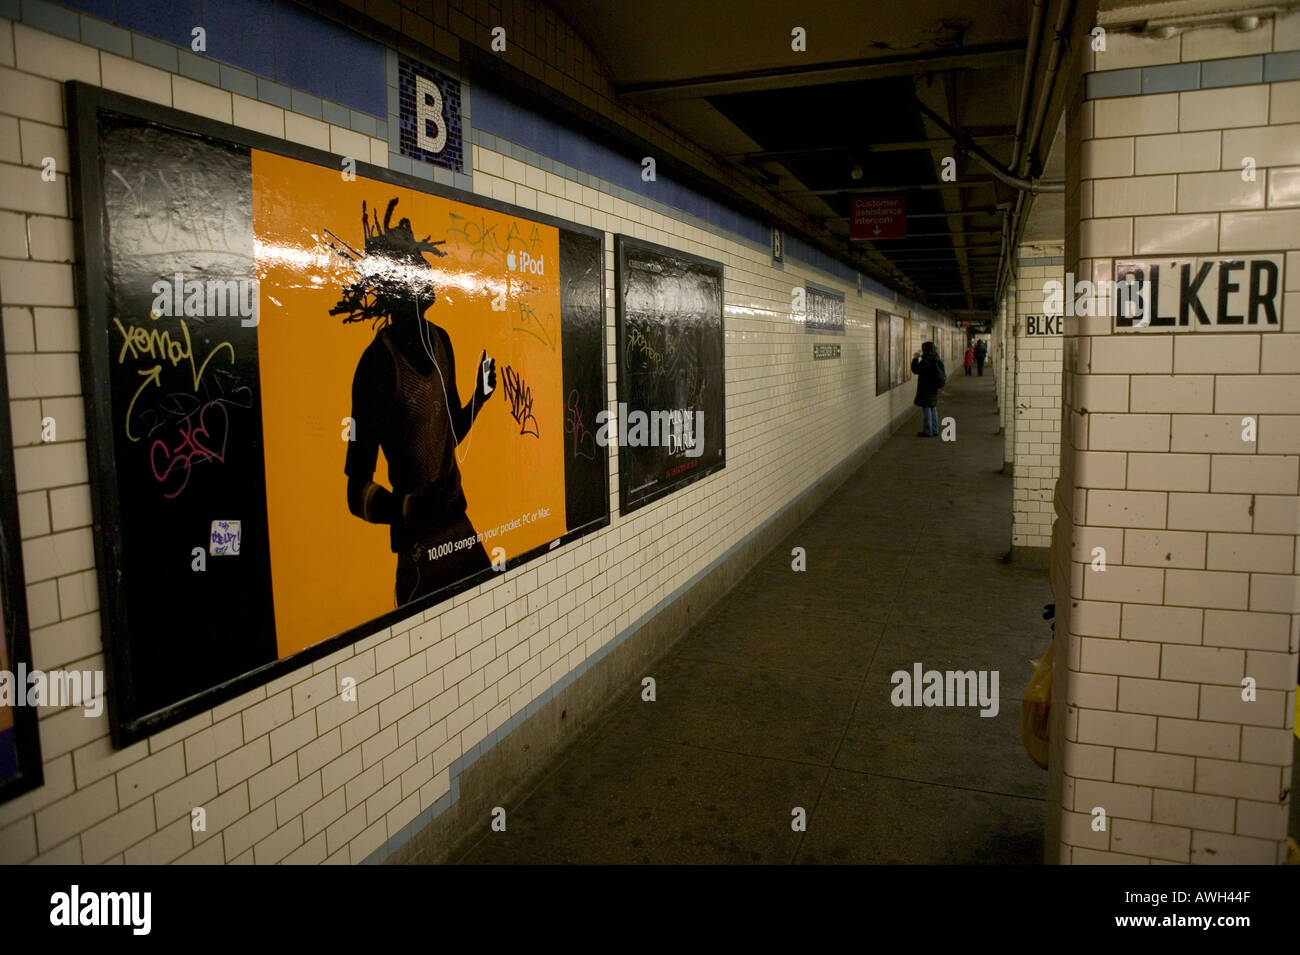 Apple iPod advertising in a subway station in New York City USA January 2005 Stock Photo